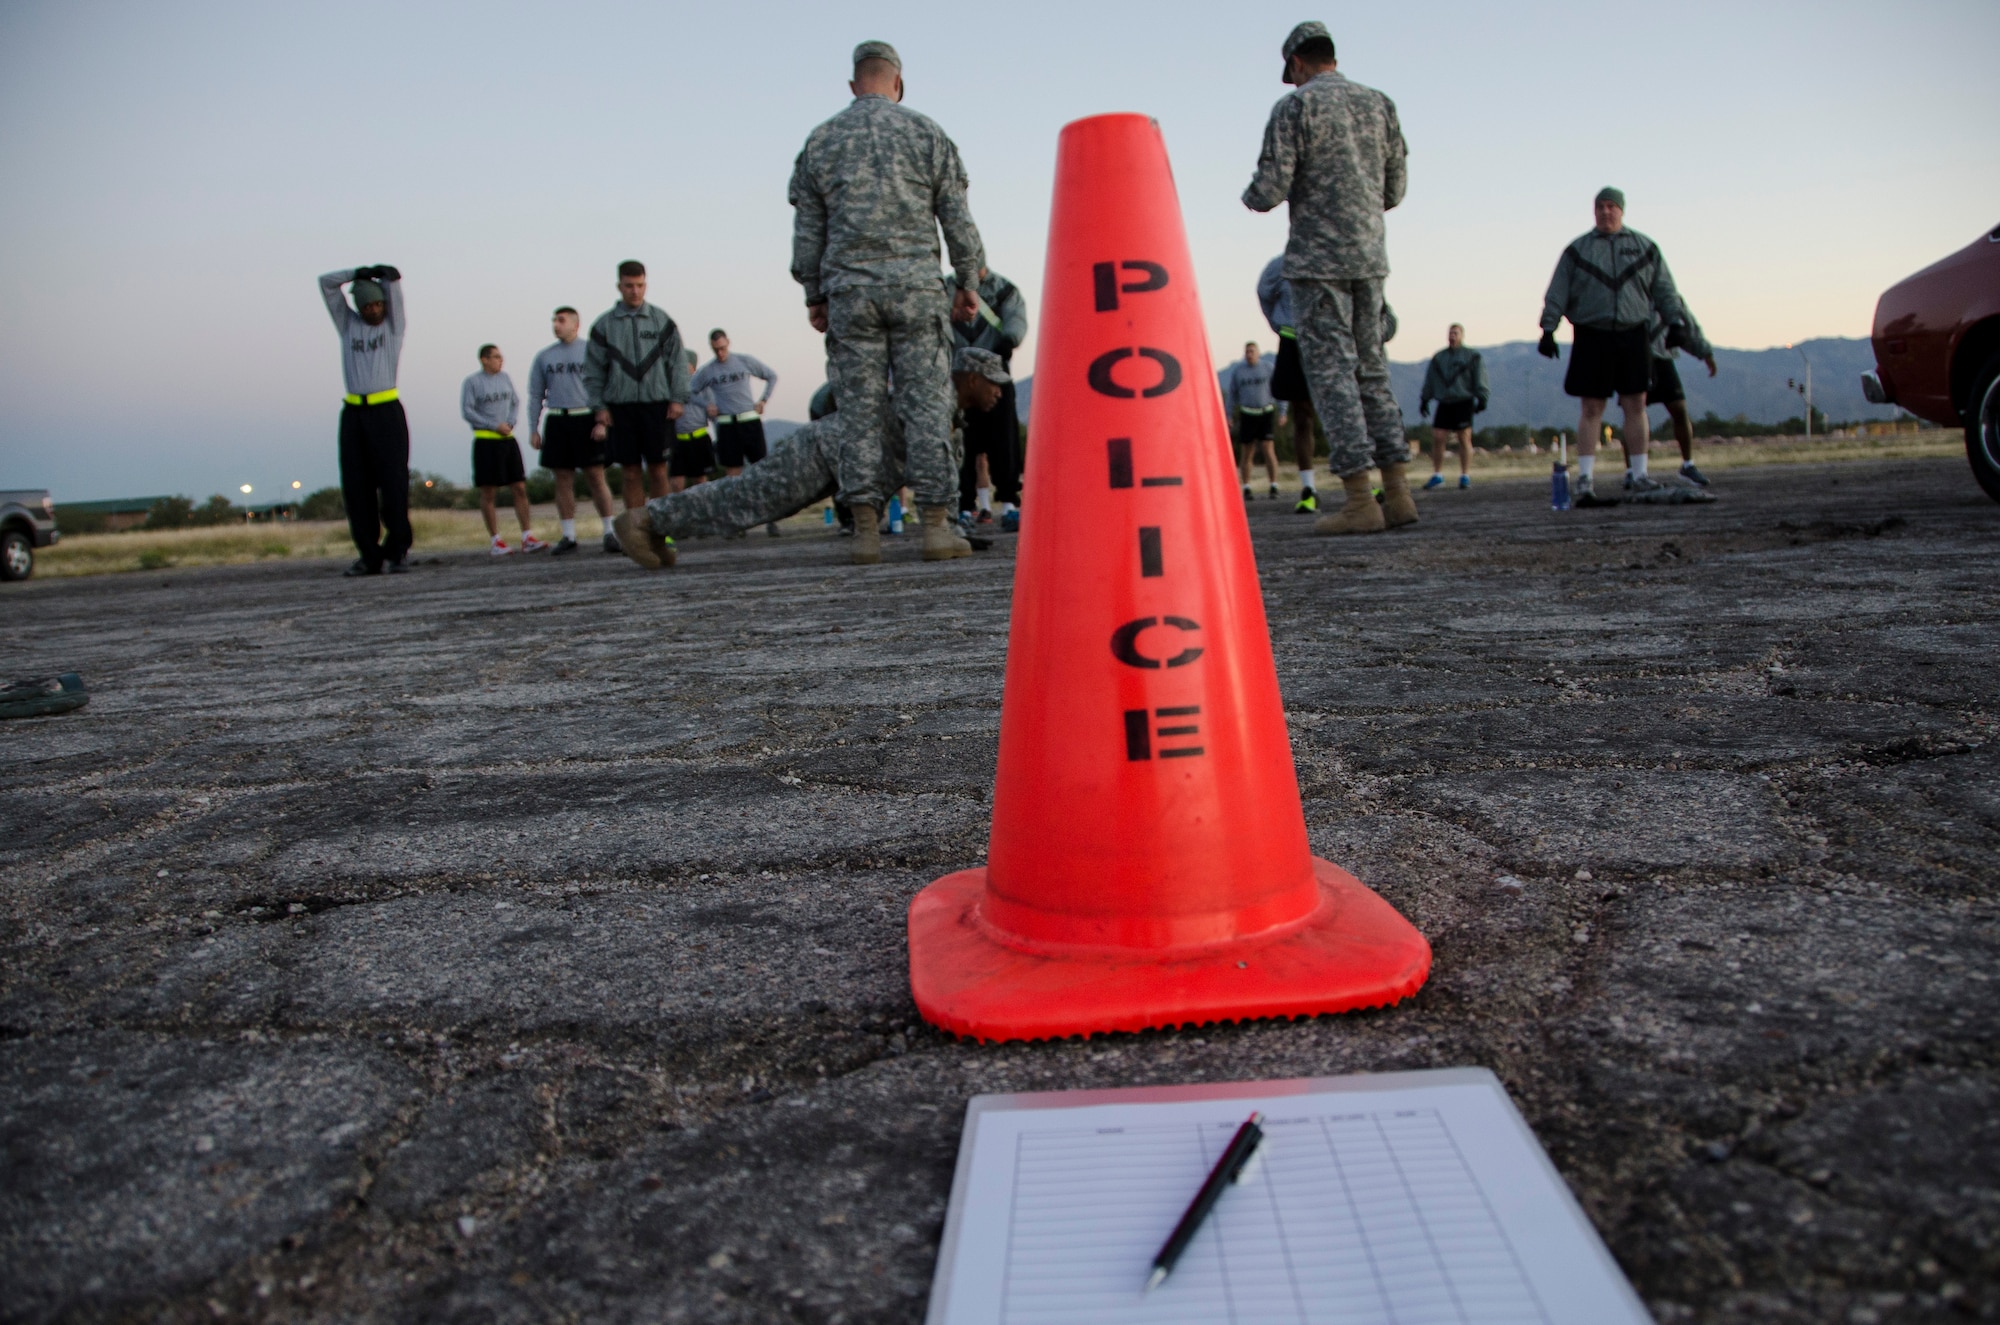 Members from the 1st Battlefield Coordination Detachment gather around and observe demonstrations on correct form before taking the Army physical fitness test at Davis-Monthan AFB, Ariz., Nov. 4, 2014.  All soldiers in the Active Army, Army National Guard, and Army Reserve are required to take the Army Physical Fitness Test. (U.S. Air Force photo by Staff Sgt. Adam Grant/Released)